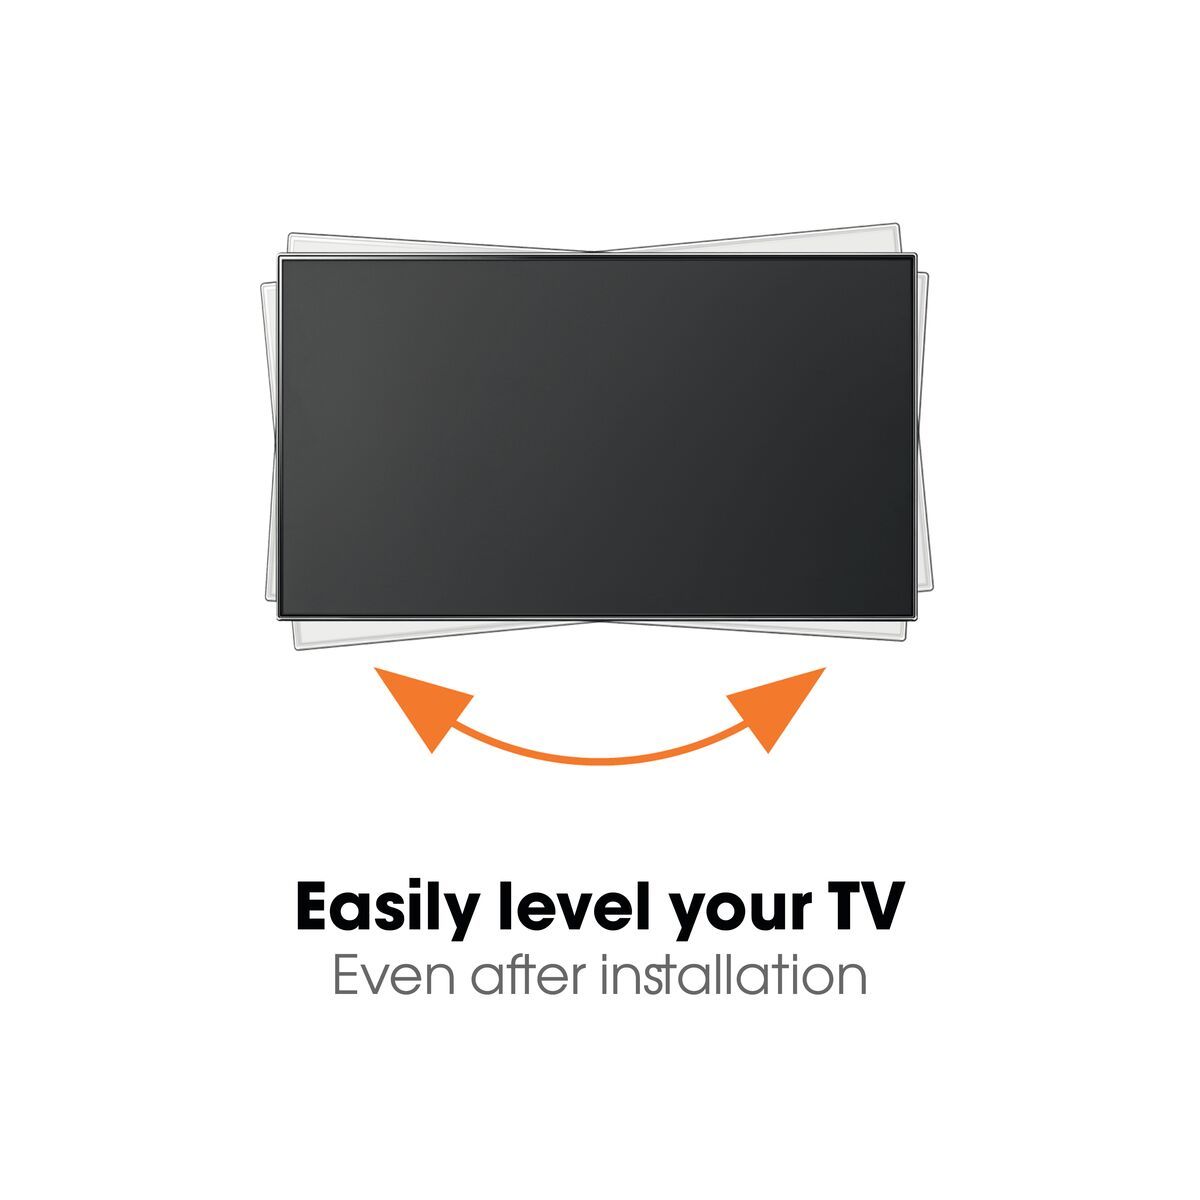 Vogel's WALL 3145 Full-Motion TV Wall Mount (white) - Suitable for 19 up to 43 inch TVs - Full motion (up to 180°) - Tilt -10°/+10° - USP